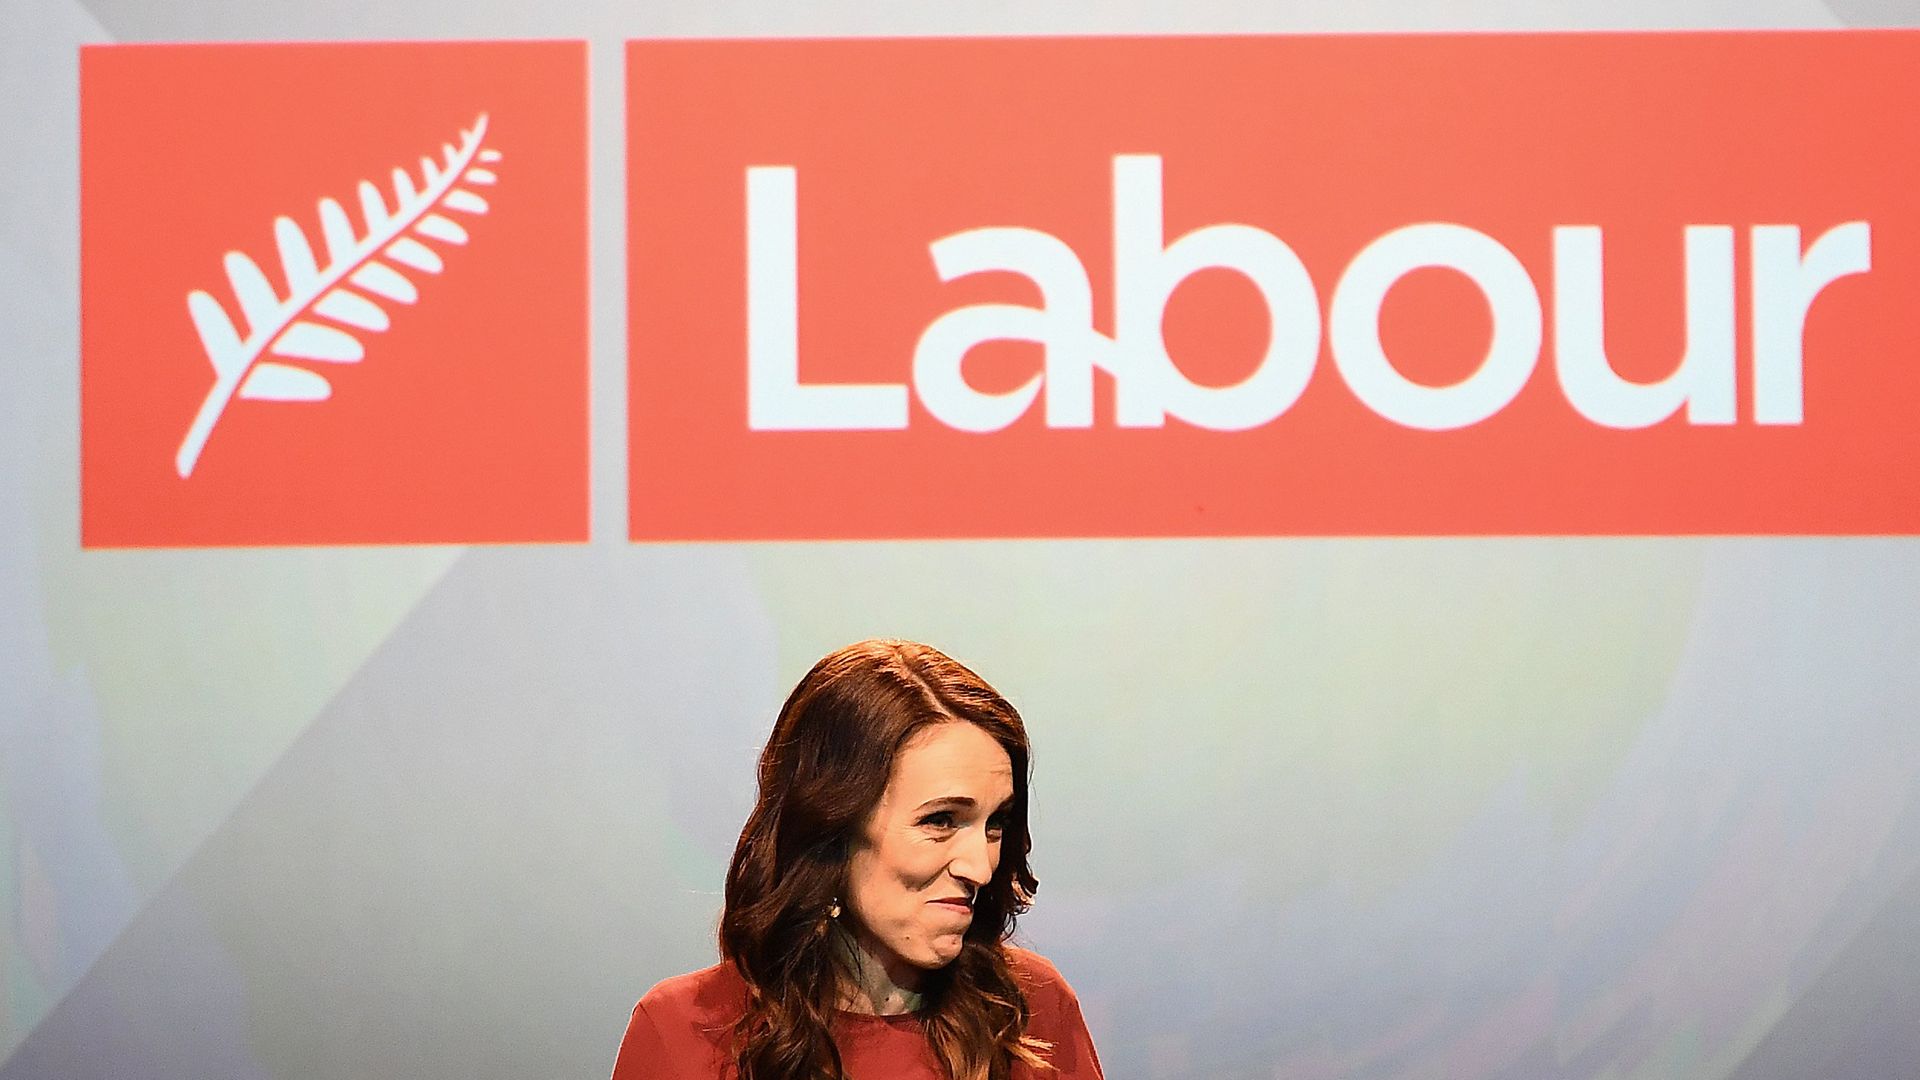 Labour Party leader and New Zealand Prime Minister Jacinda Ardern claims victory - Credit: Hannah Peters/Getty Images